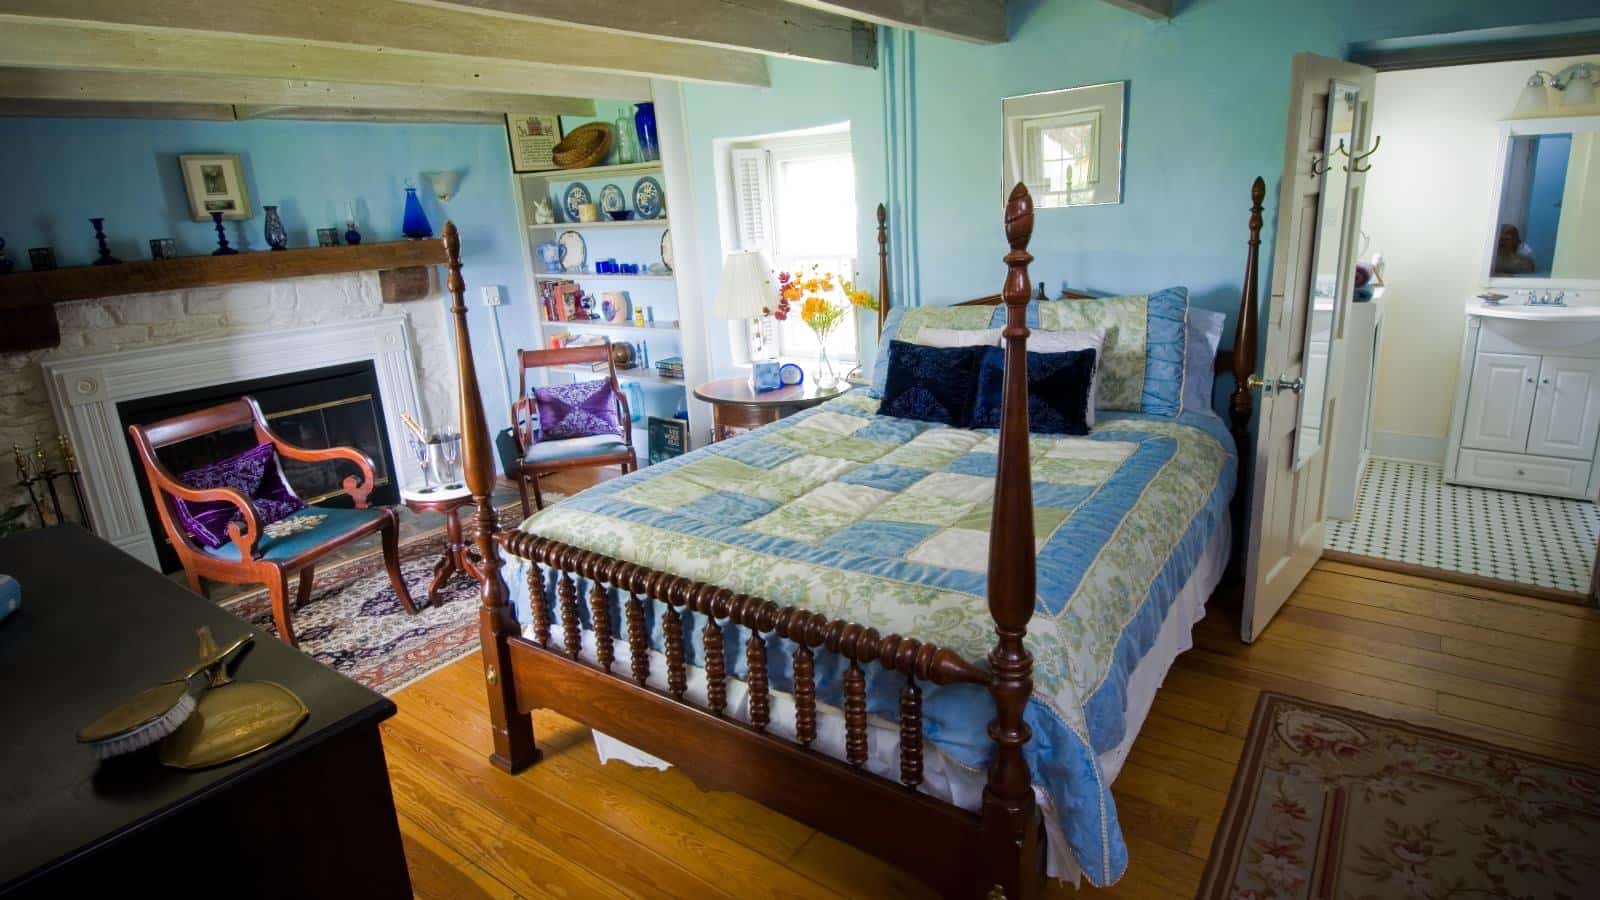 Bedroom with light blue walls, hardwood flooring, dark wooden four poster bed, fireplace, and sitting area